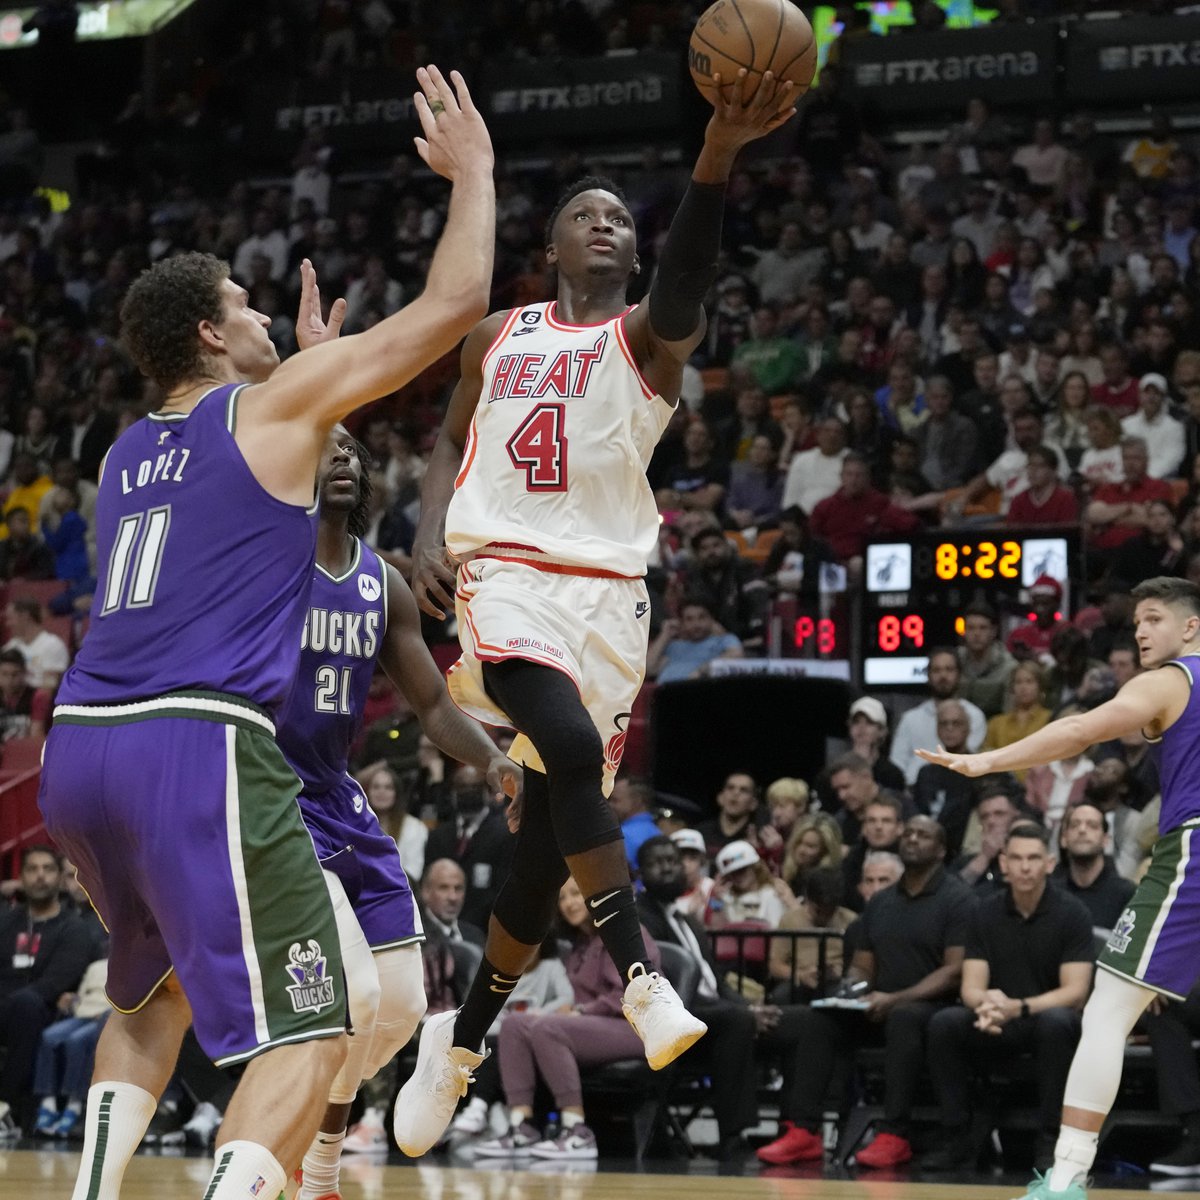 Vincent leads Heat to 2nd straight win over Bucks